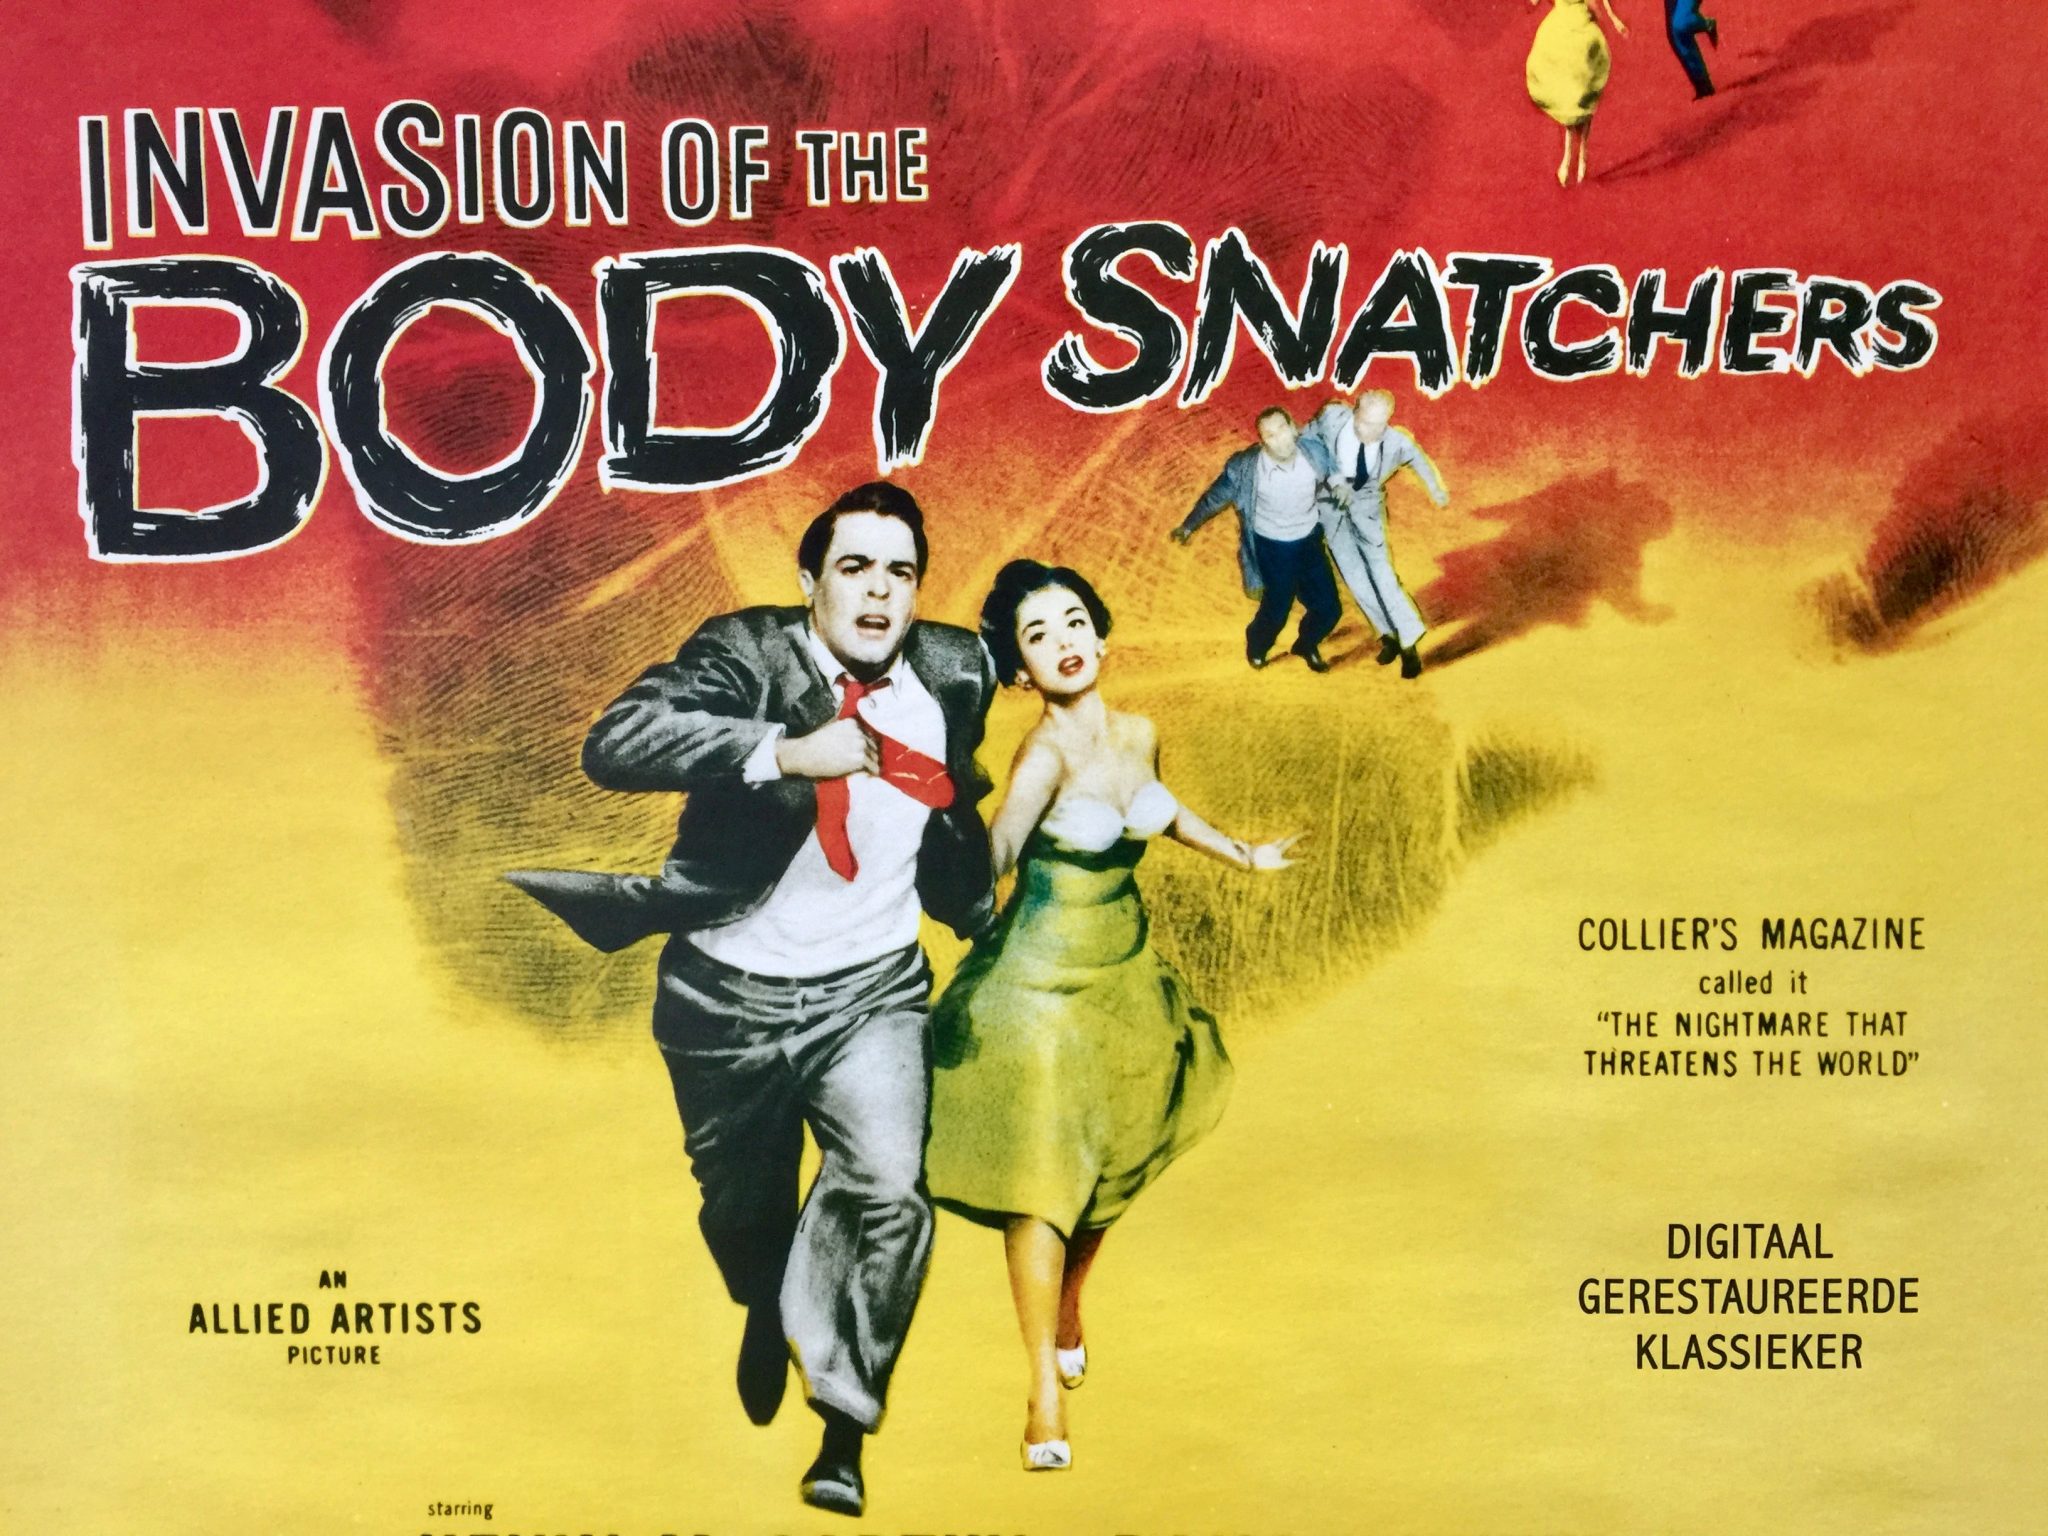 invasion-of-the-body-snatchers-intl-r2015-us-one-sheet-14